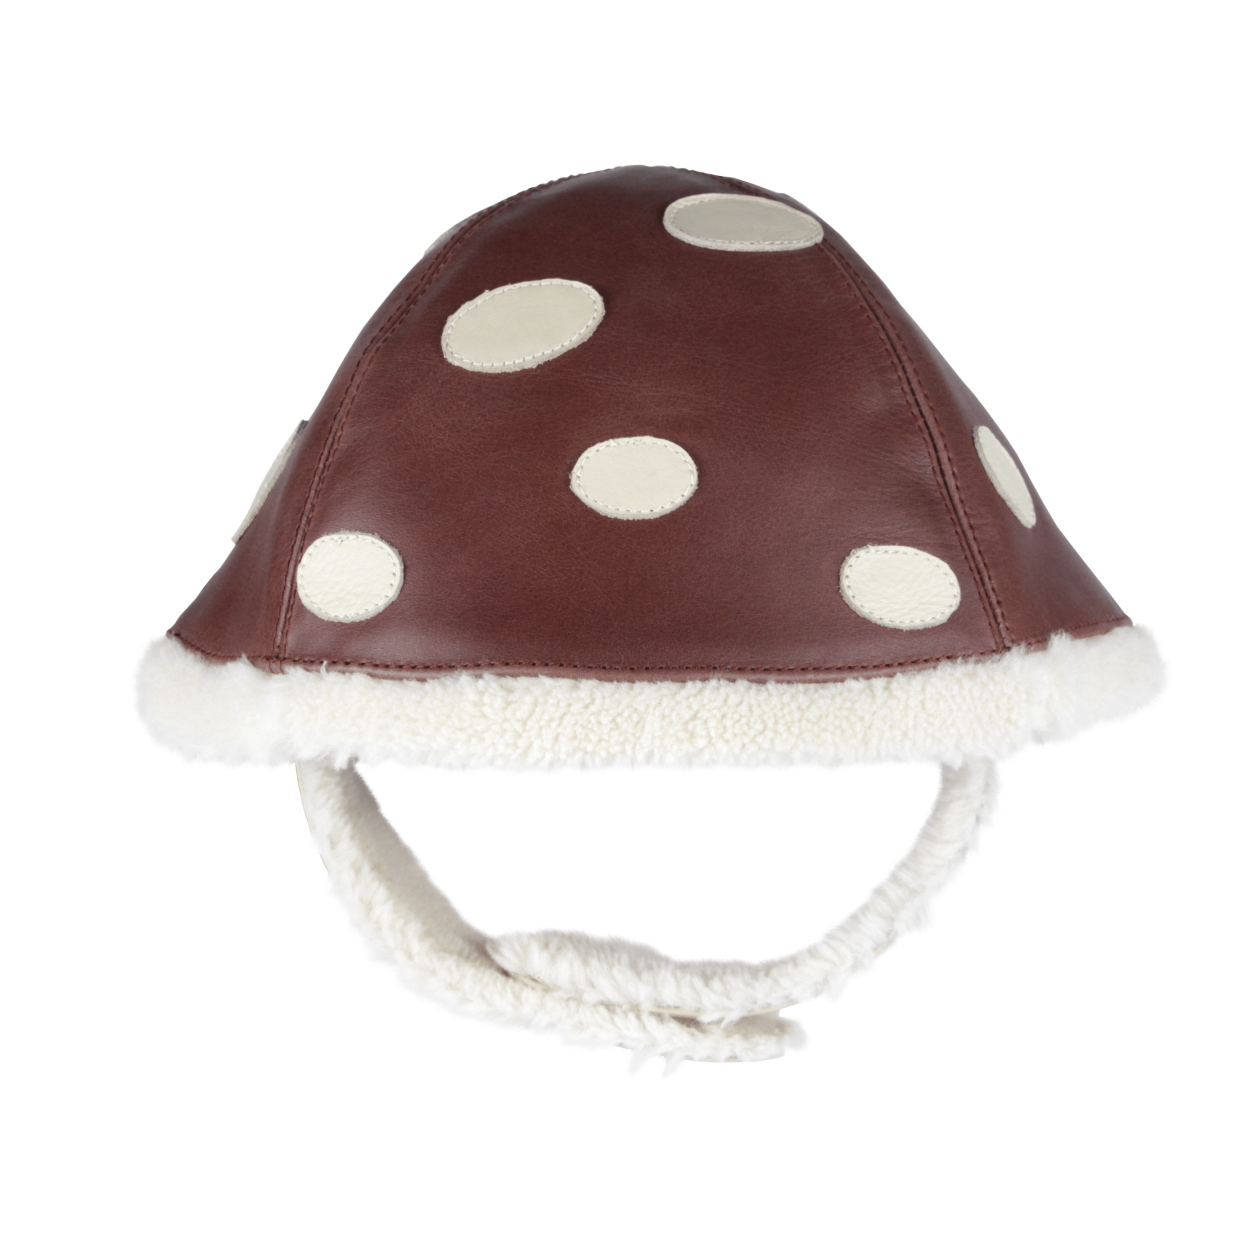 Wilder Hat | Toadstool | Burgundy Classic Leather